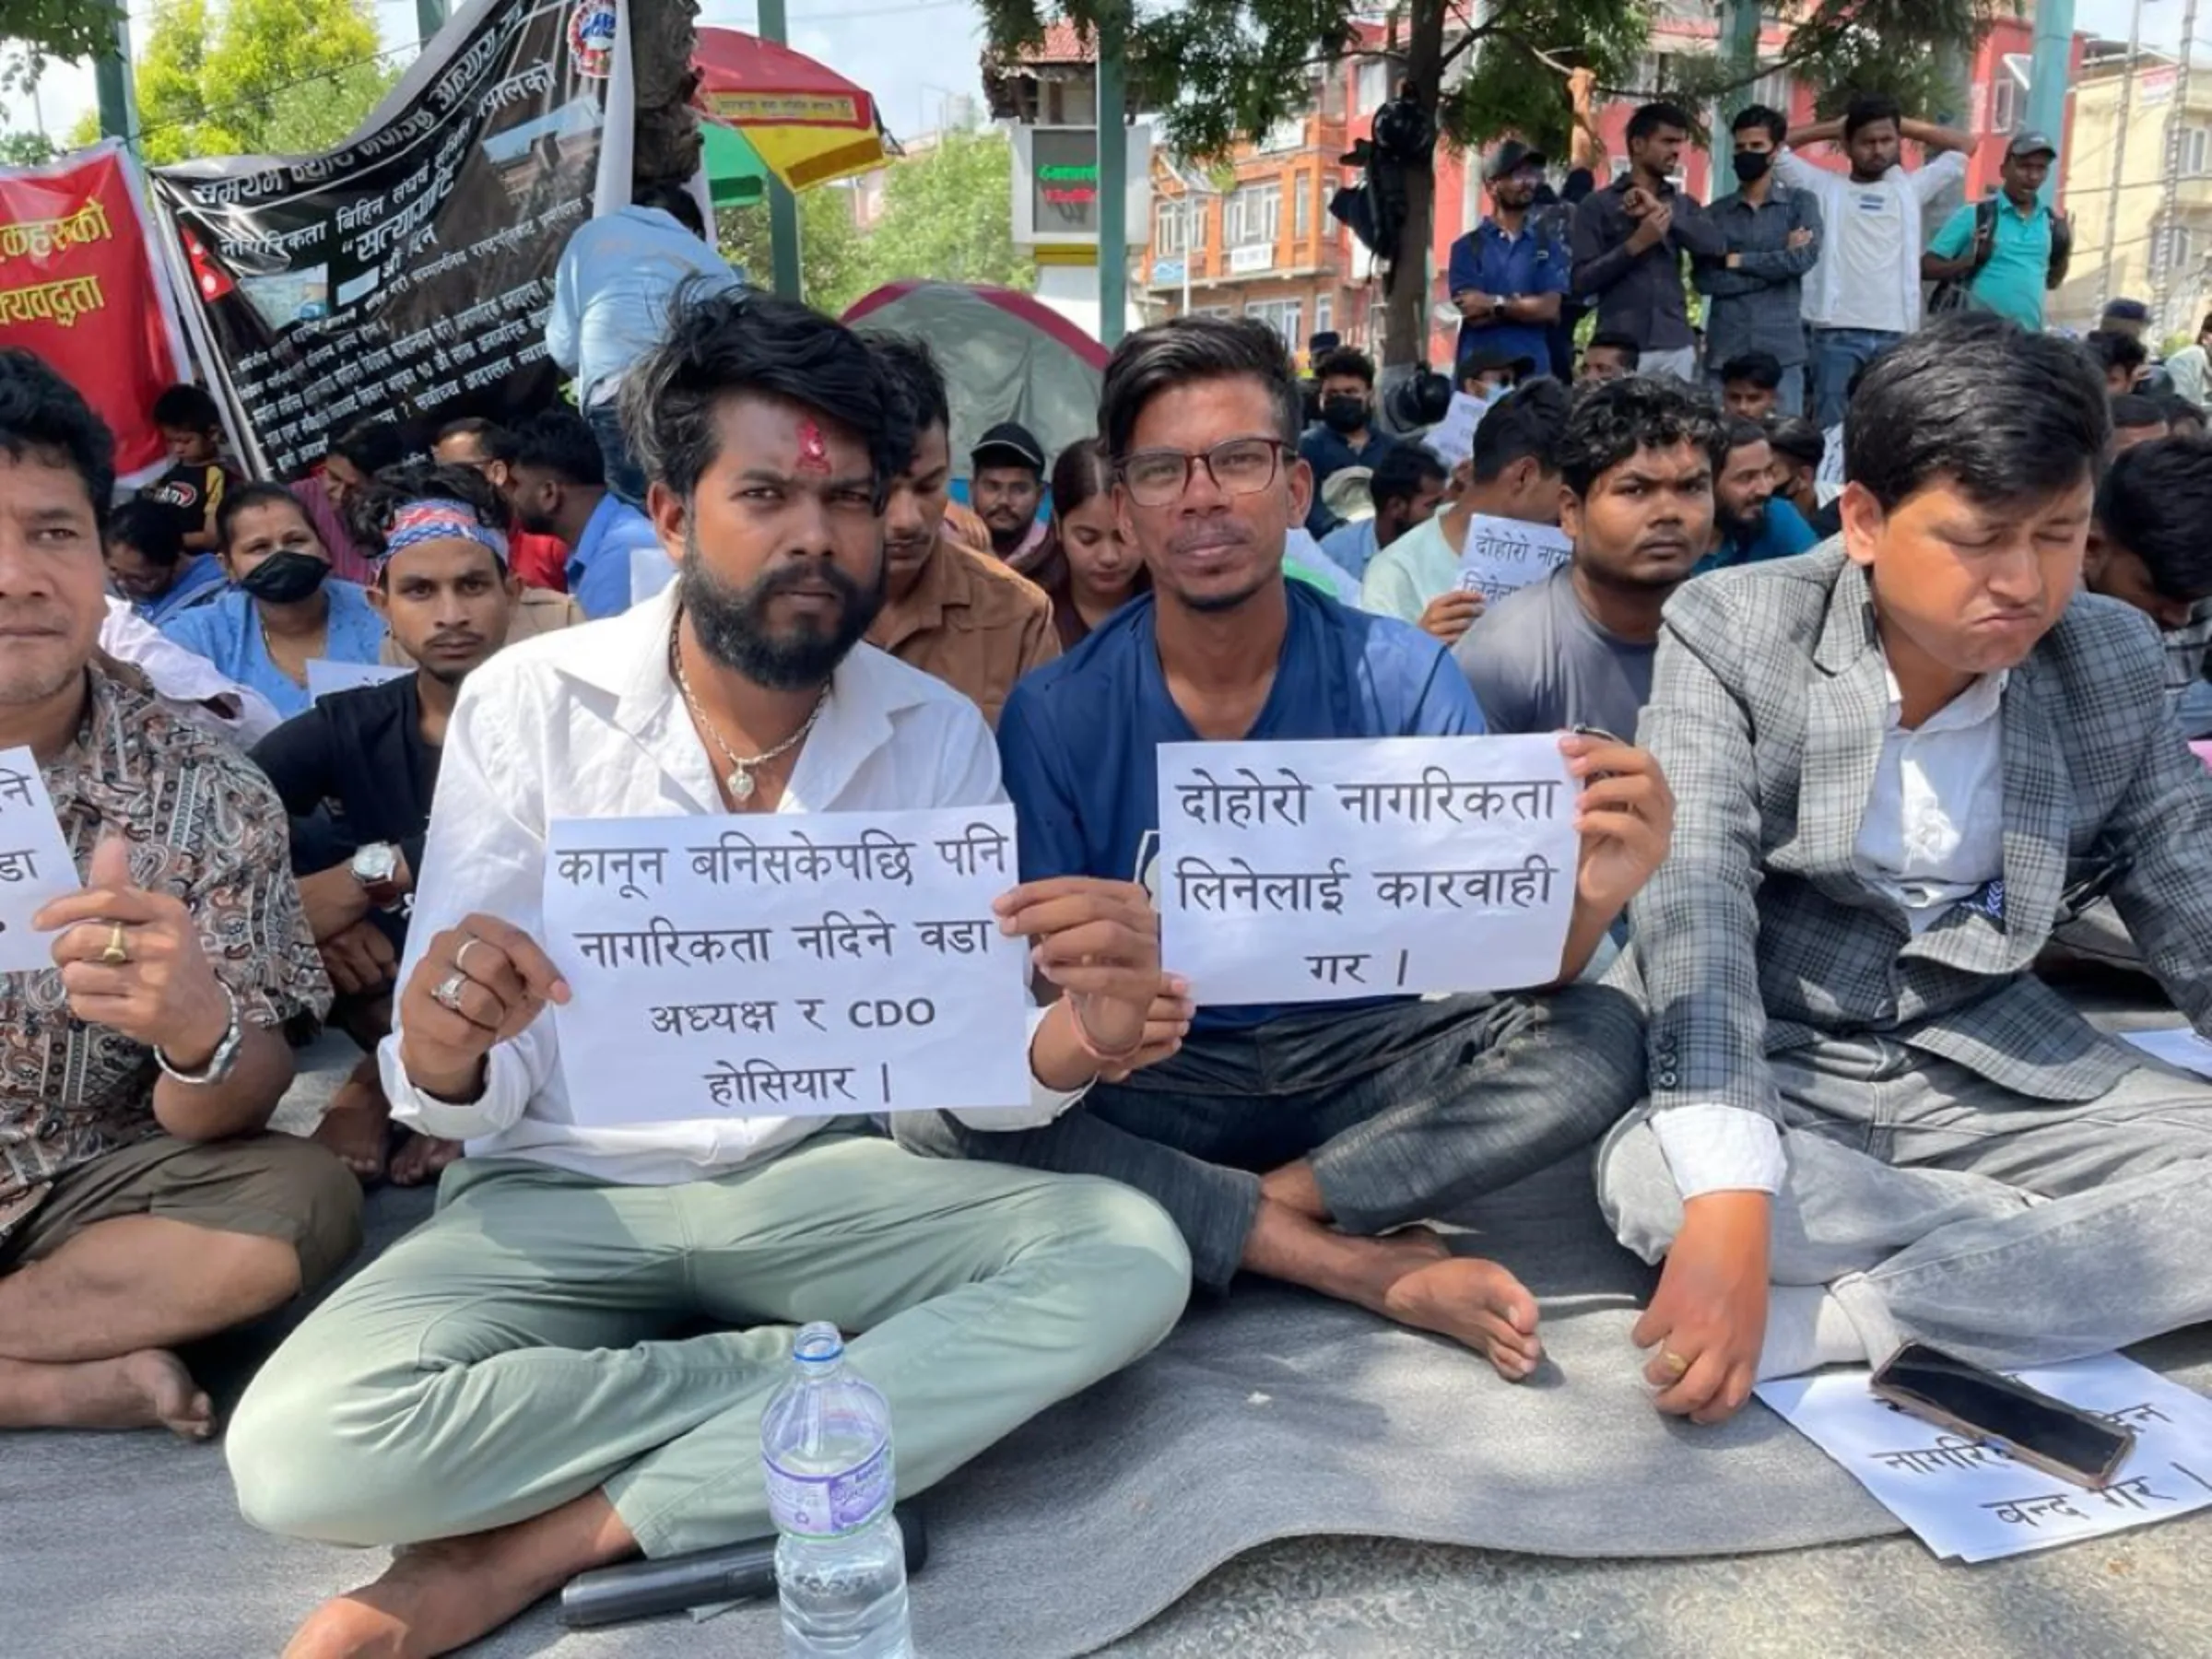 Indrajit Saphi (left) and other activists protest over delays in providing citizenship certificates, June 2023. Indrajit Saphi/Handout via Thomson Reuters Foundation